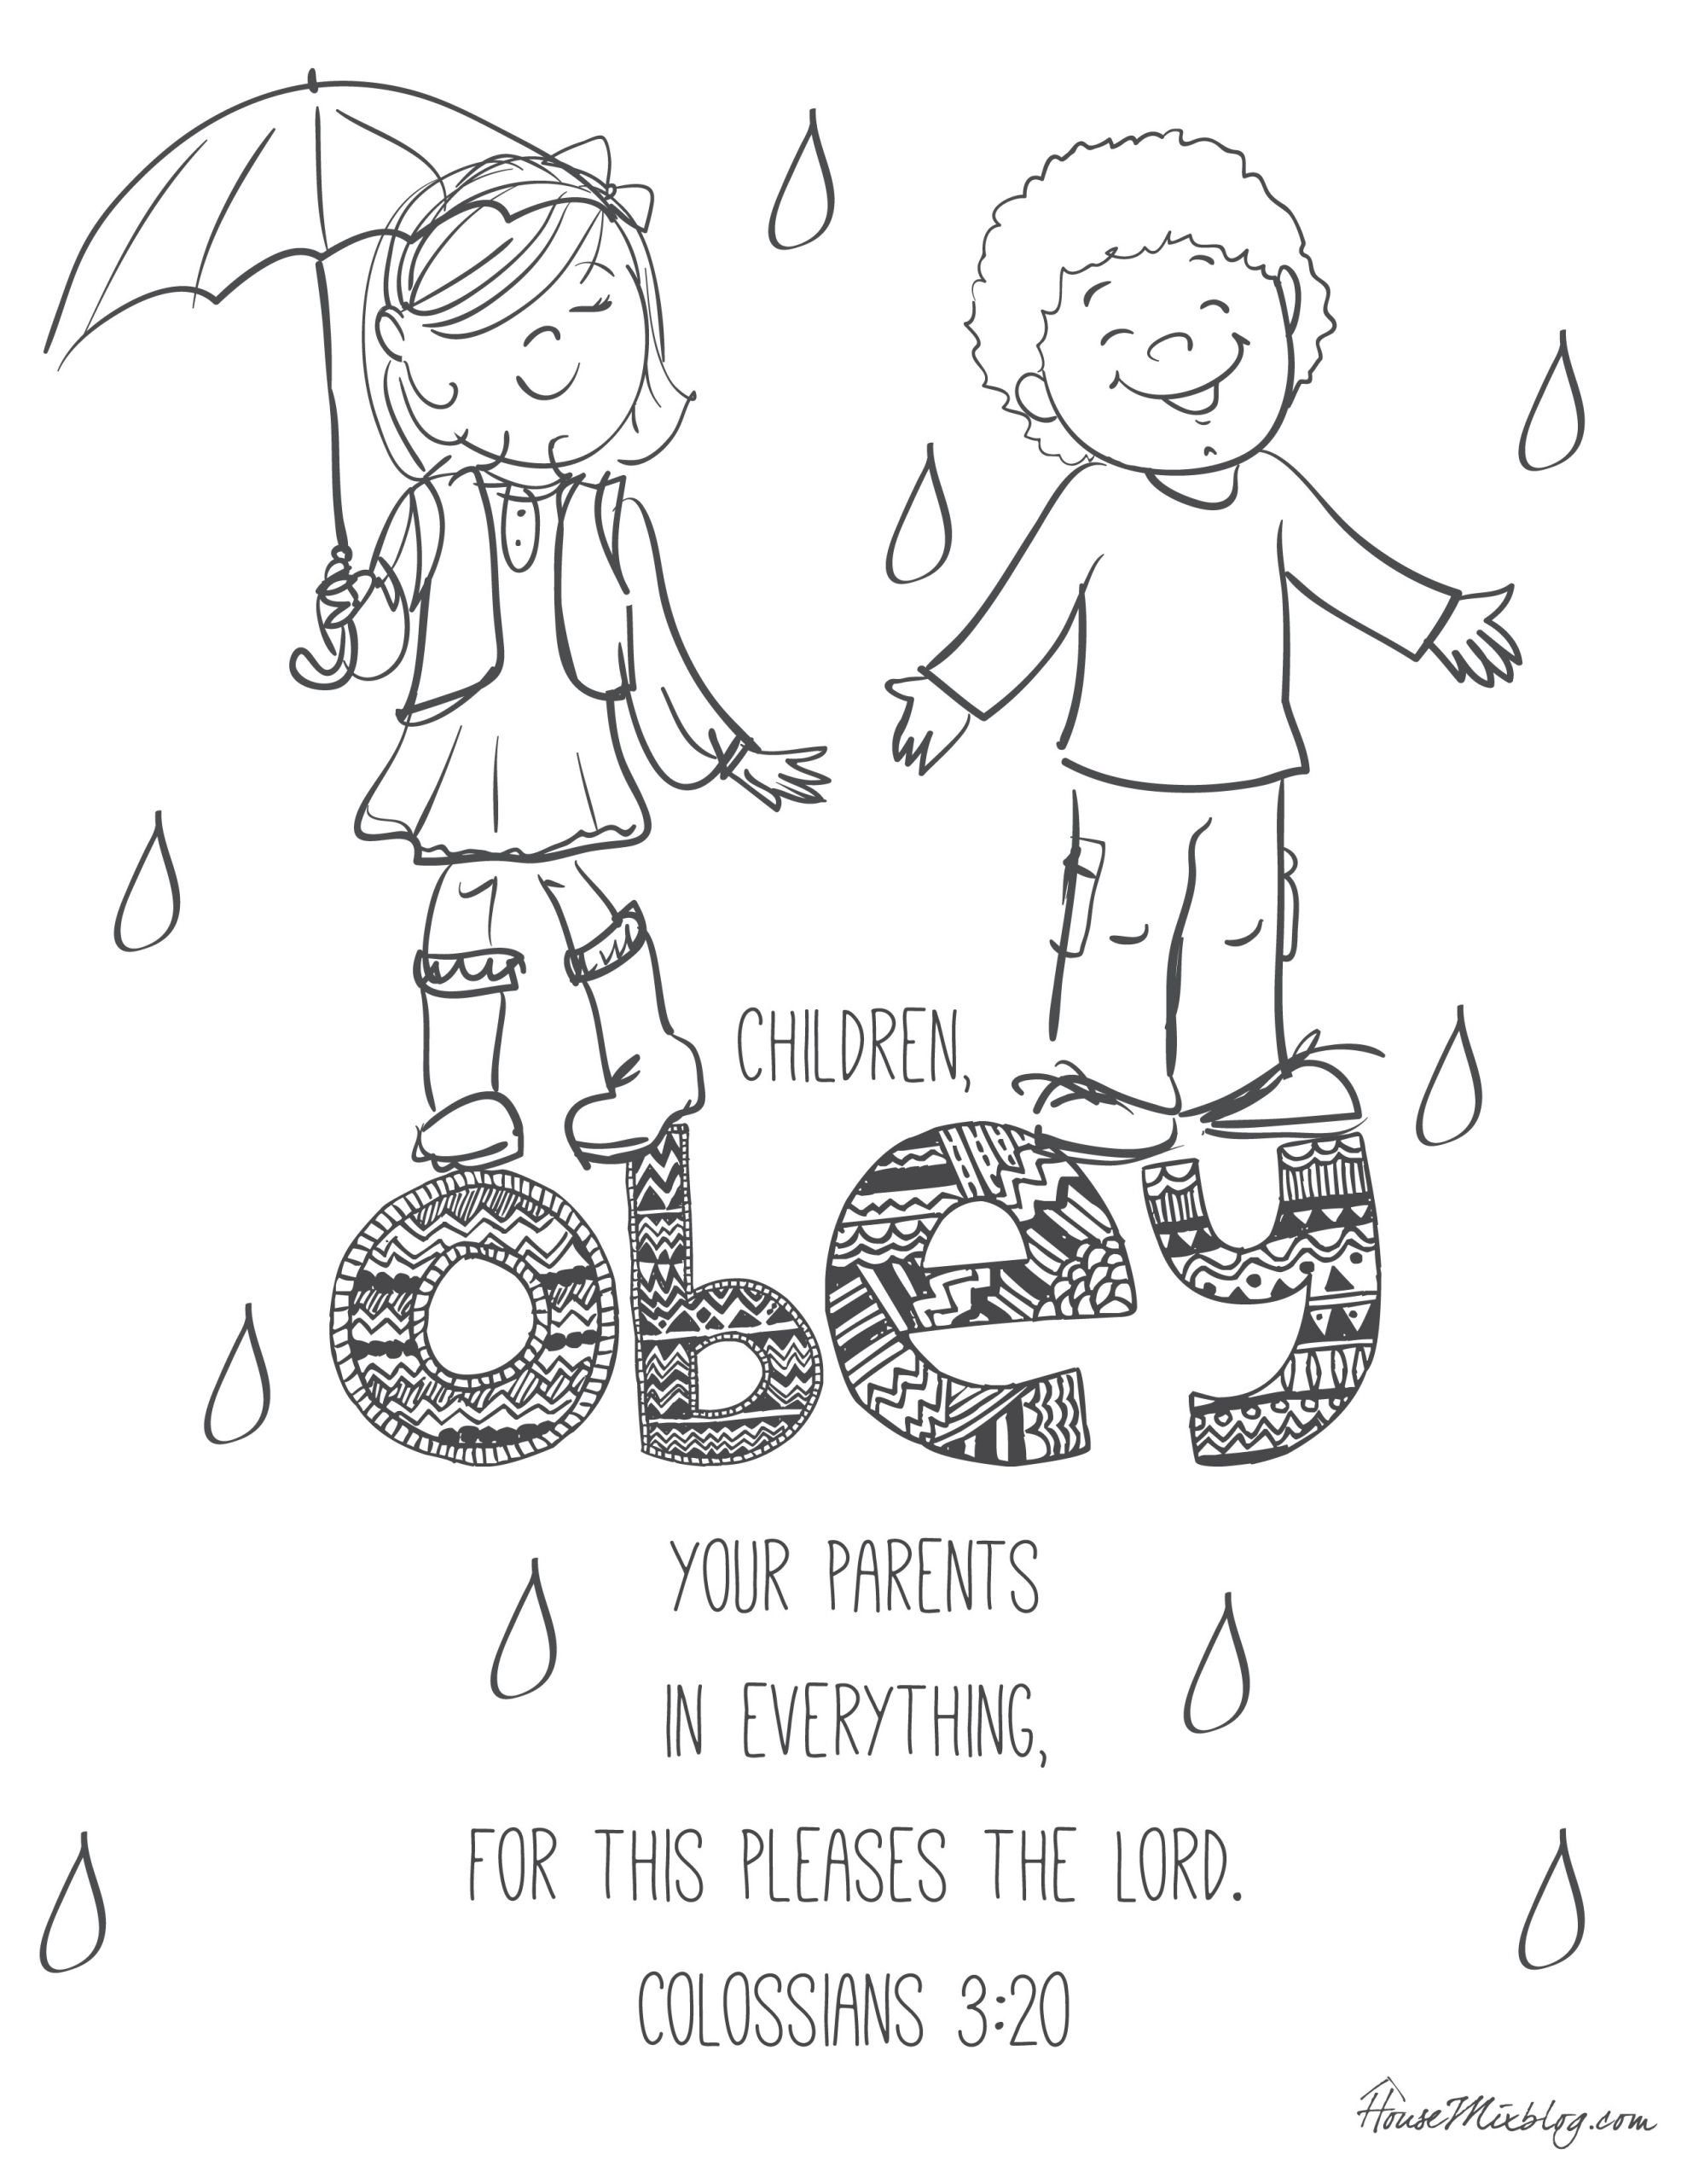 Kids Bible Coloring Page
 11 Bible verses to teach kids with printables to color